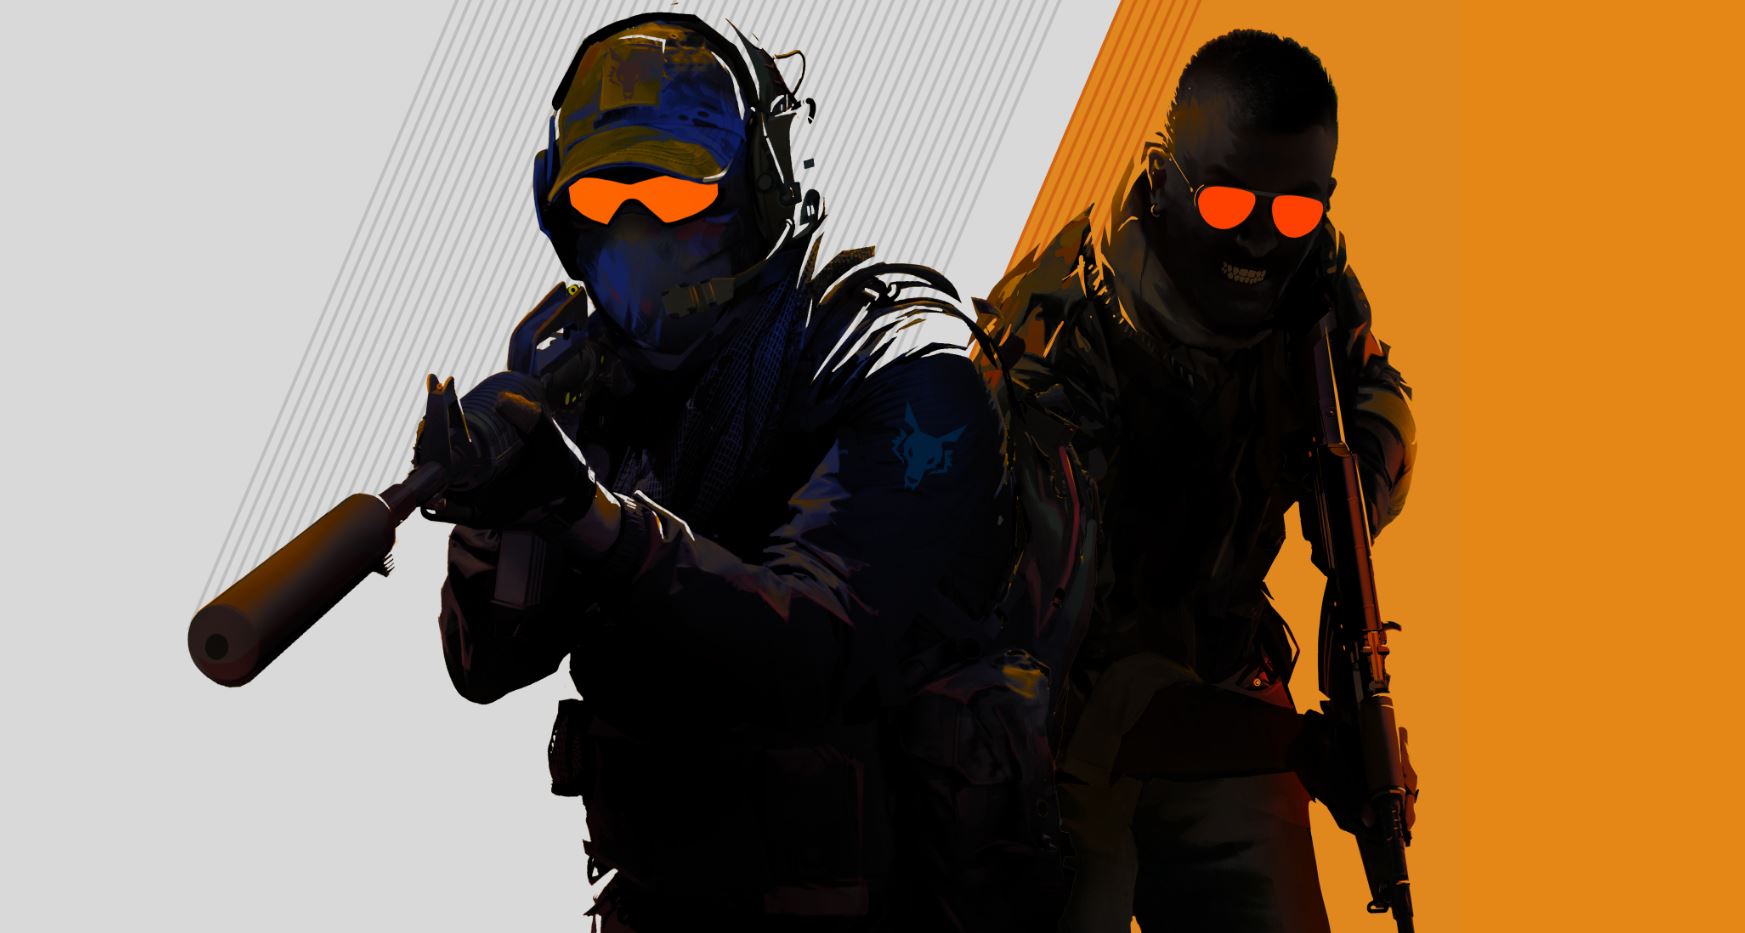 A promotional image featuring two Counter-Strike 2 soldiers.